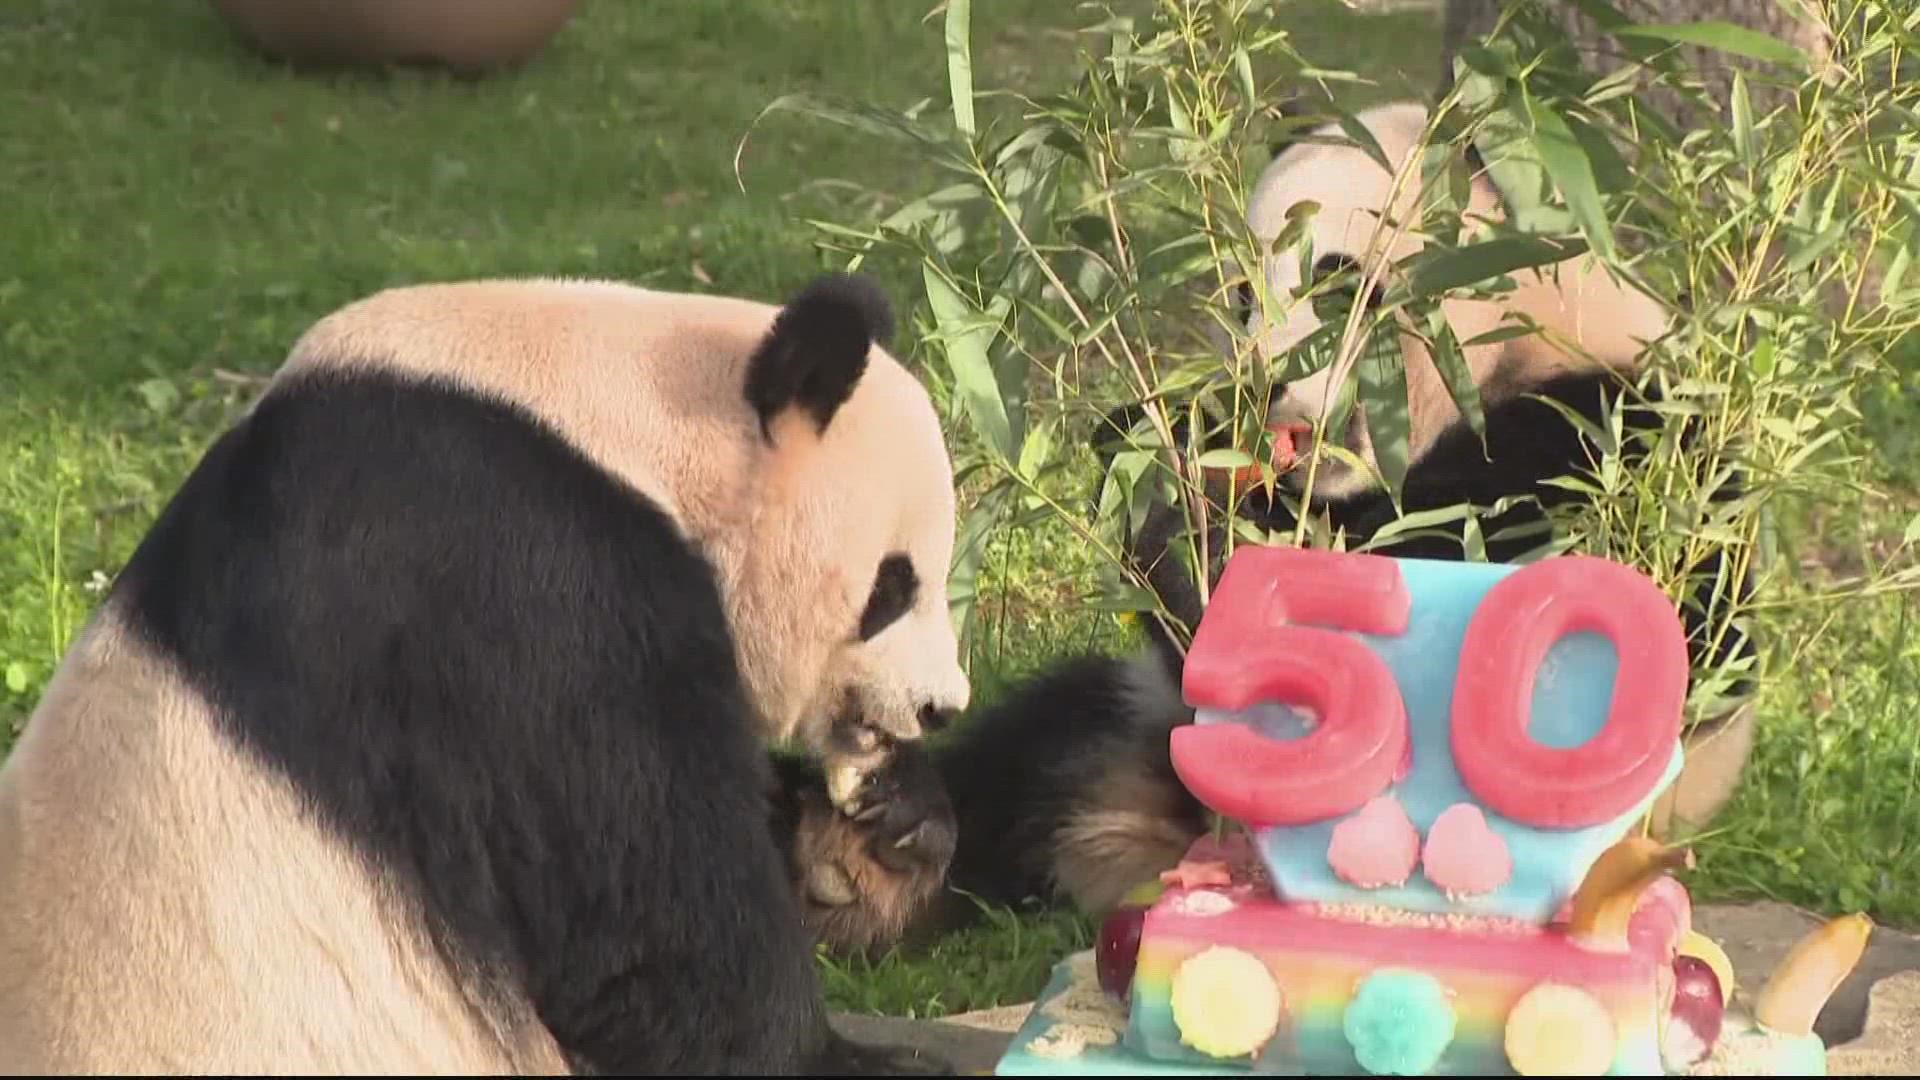 First Lady Patricia Nixon helped bring pandas to Washington DC on April 16, 1972. In honor of the anniversary, the adorable pandas ate some cake and it is too cute.